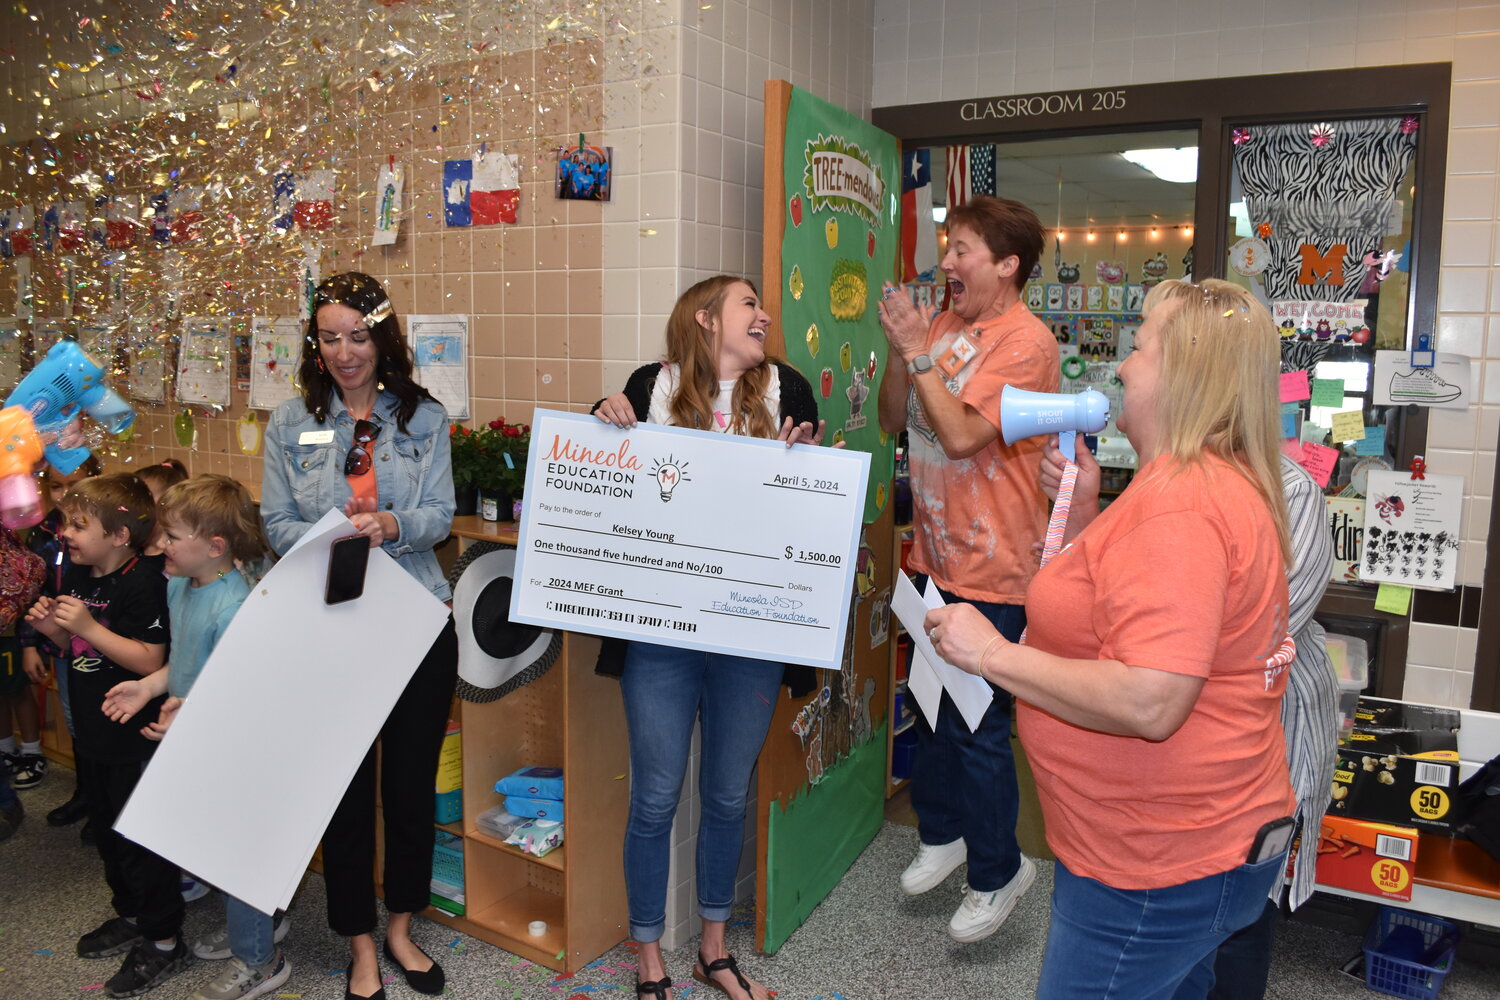 Kelsey Young and Stacy Wedding are excited to receive a $1,500 grant for motor skill development toys for the Mineola Primary School. The Mineola Education Foundation passed out 39 classroom teacher grants on Friday.